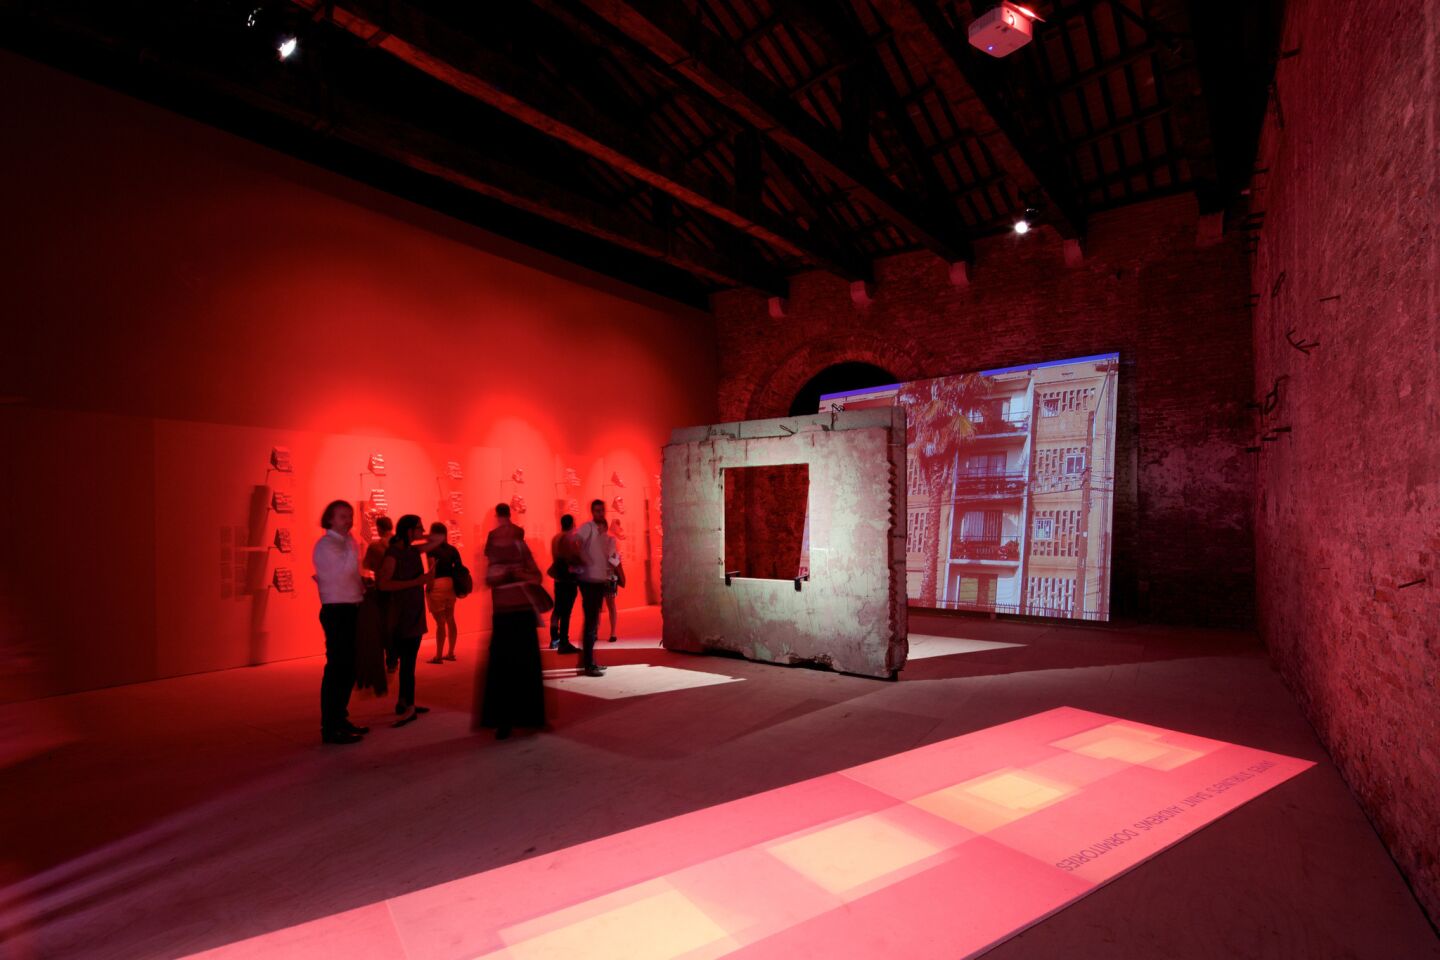 An installation view of Pedro Alonso and Hugo Palmarola's project, 'Monolith Controversies,' at the Venice Architecture Biennale in 2014. In the early '70s, the Soviet Union donated a pre-fab panel factory to Chile. Alonso and Palmarola located one of the first panels ever made and put it on display. It was signed by Chilean president Salvador Allende.